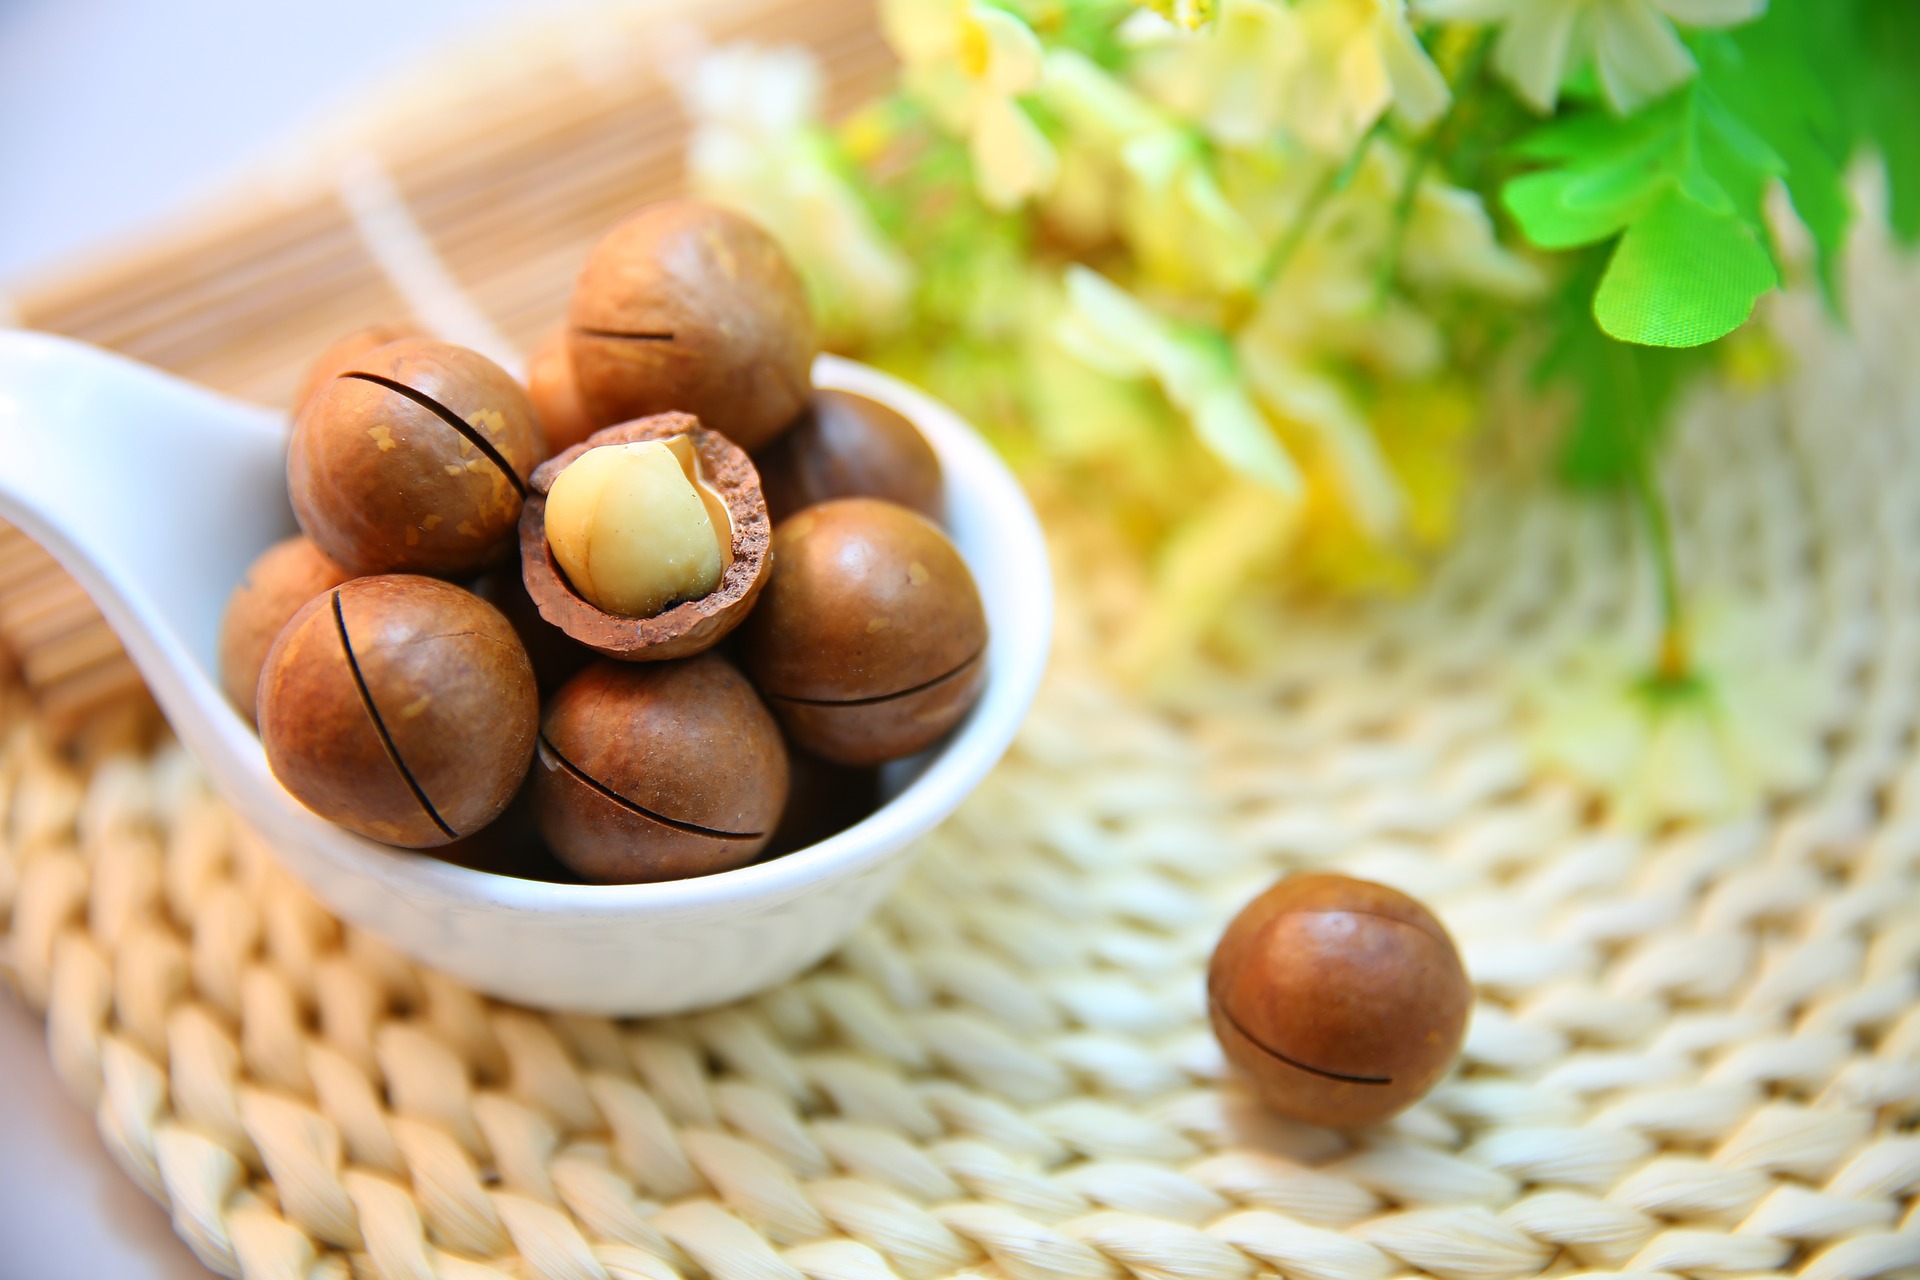 macadamia_nuts_with_one_cracked_and_exposing_the_nut